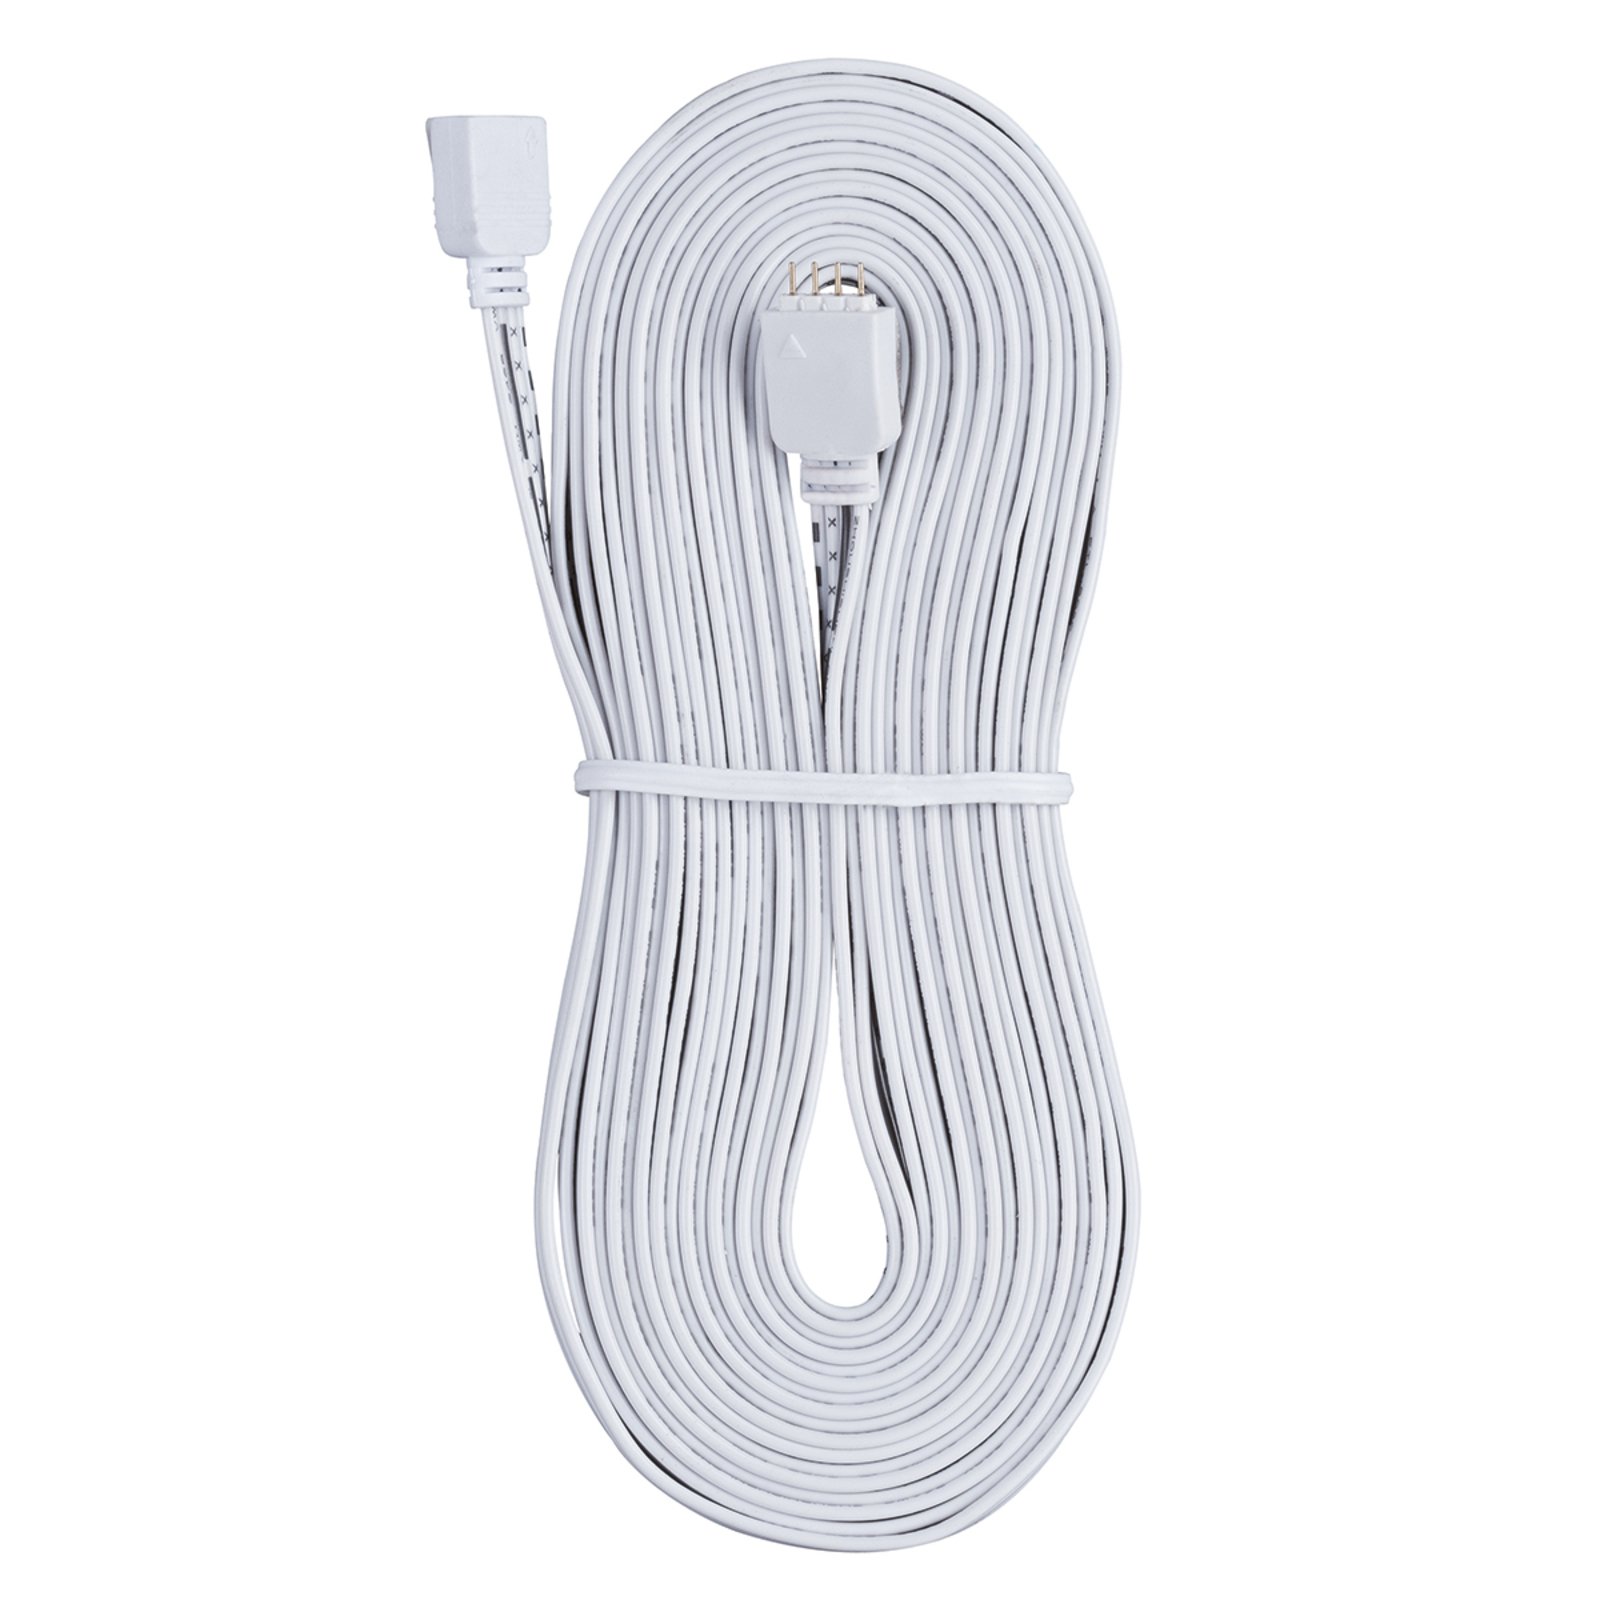 Connection cables for LED strip system, 5 m